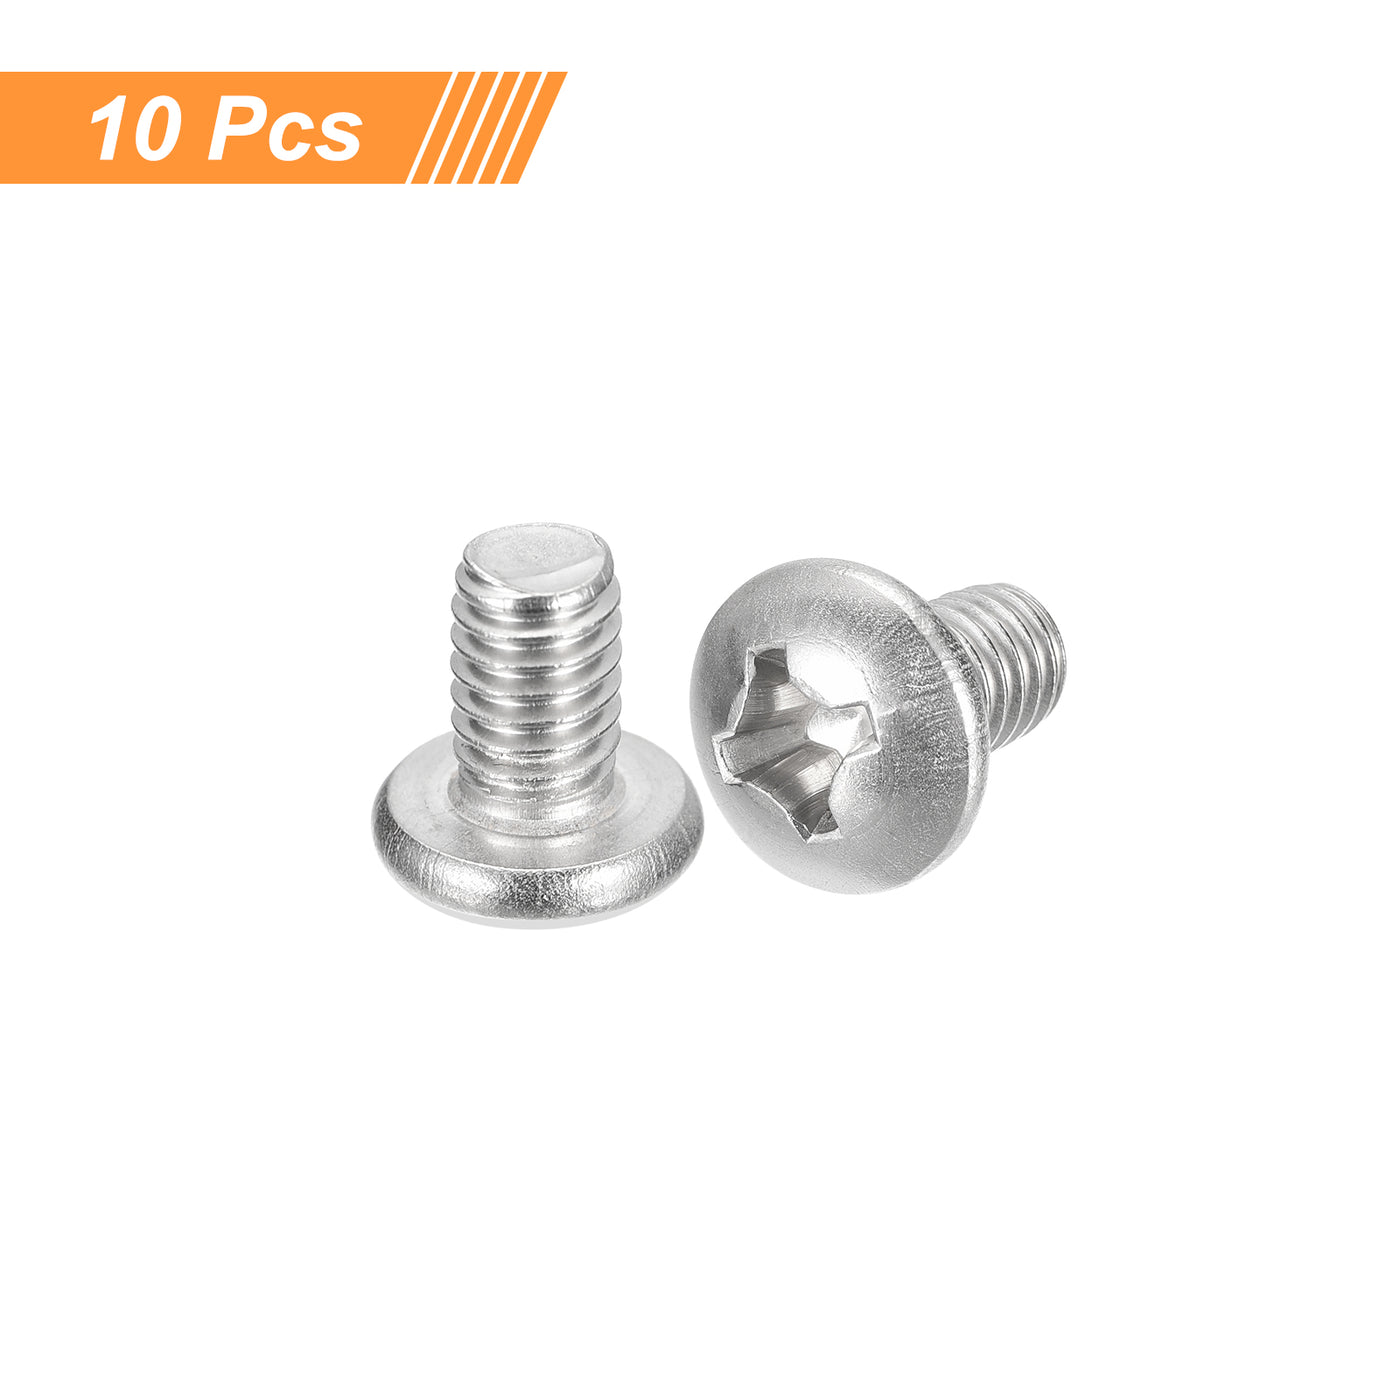 uxcell Uxcell 5/16-18x1/2" Pan Head Machine Screws, Stainless Steel 18-8 Screw, Pack of 10